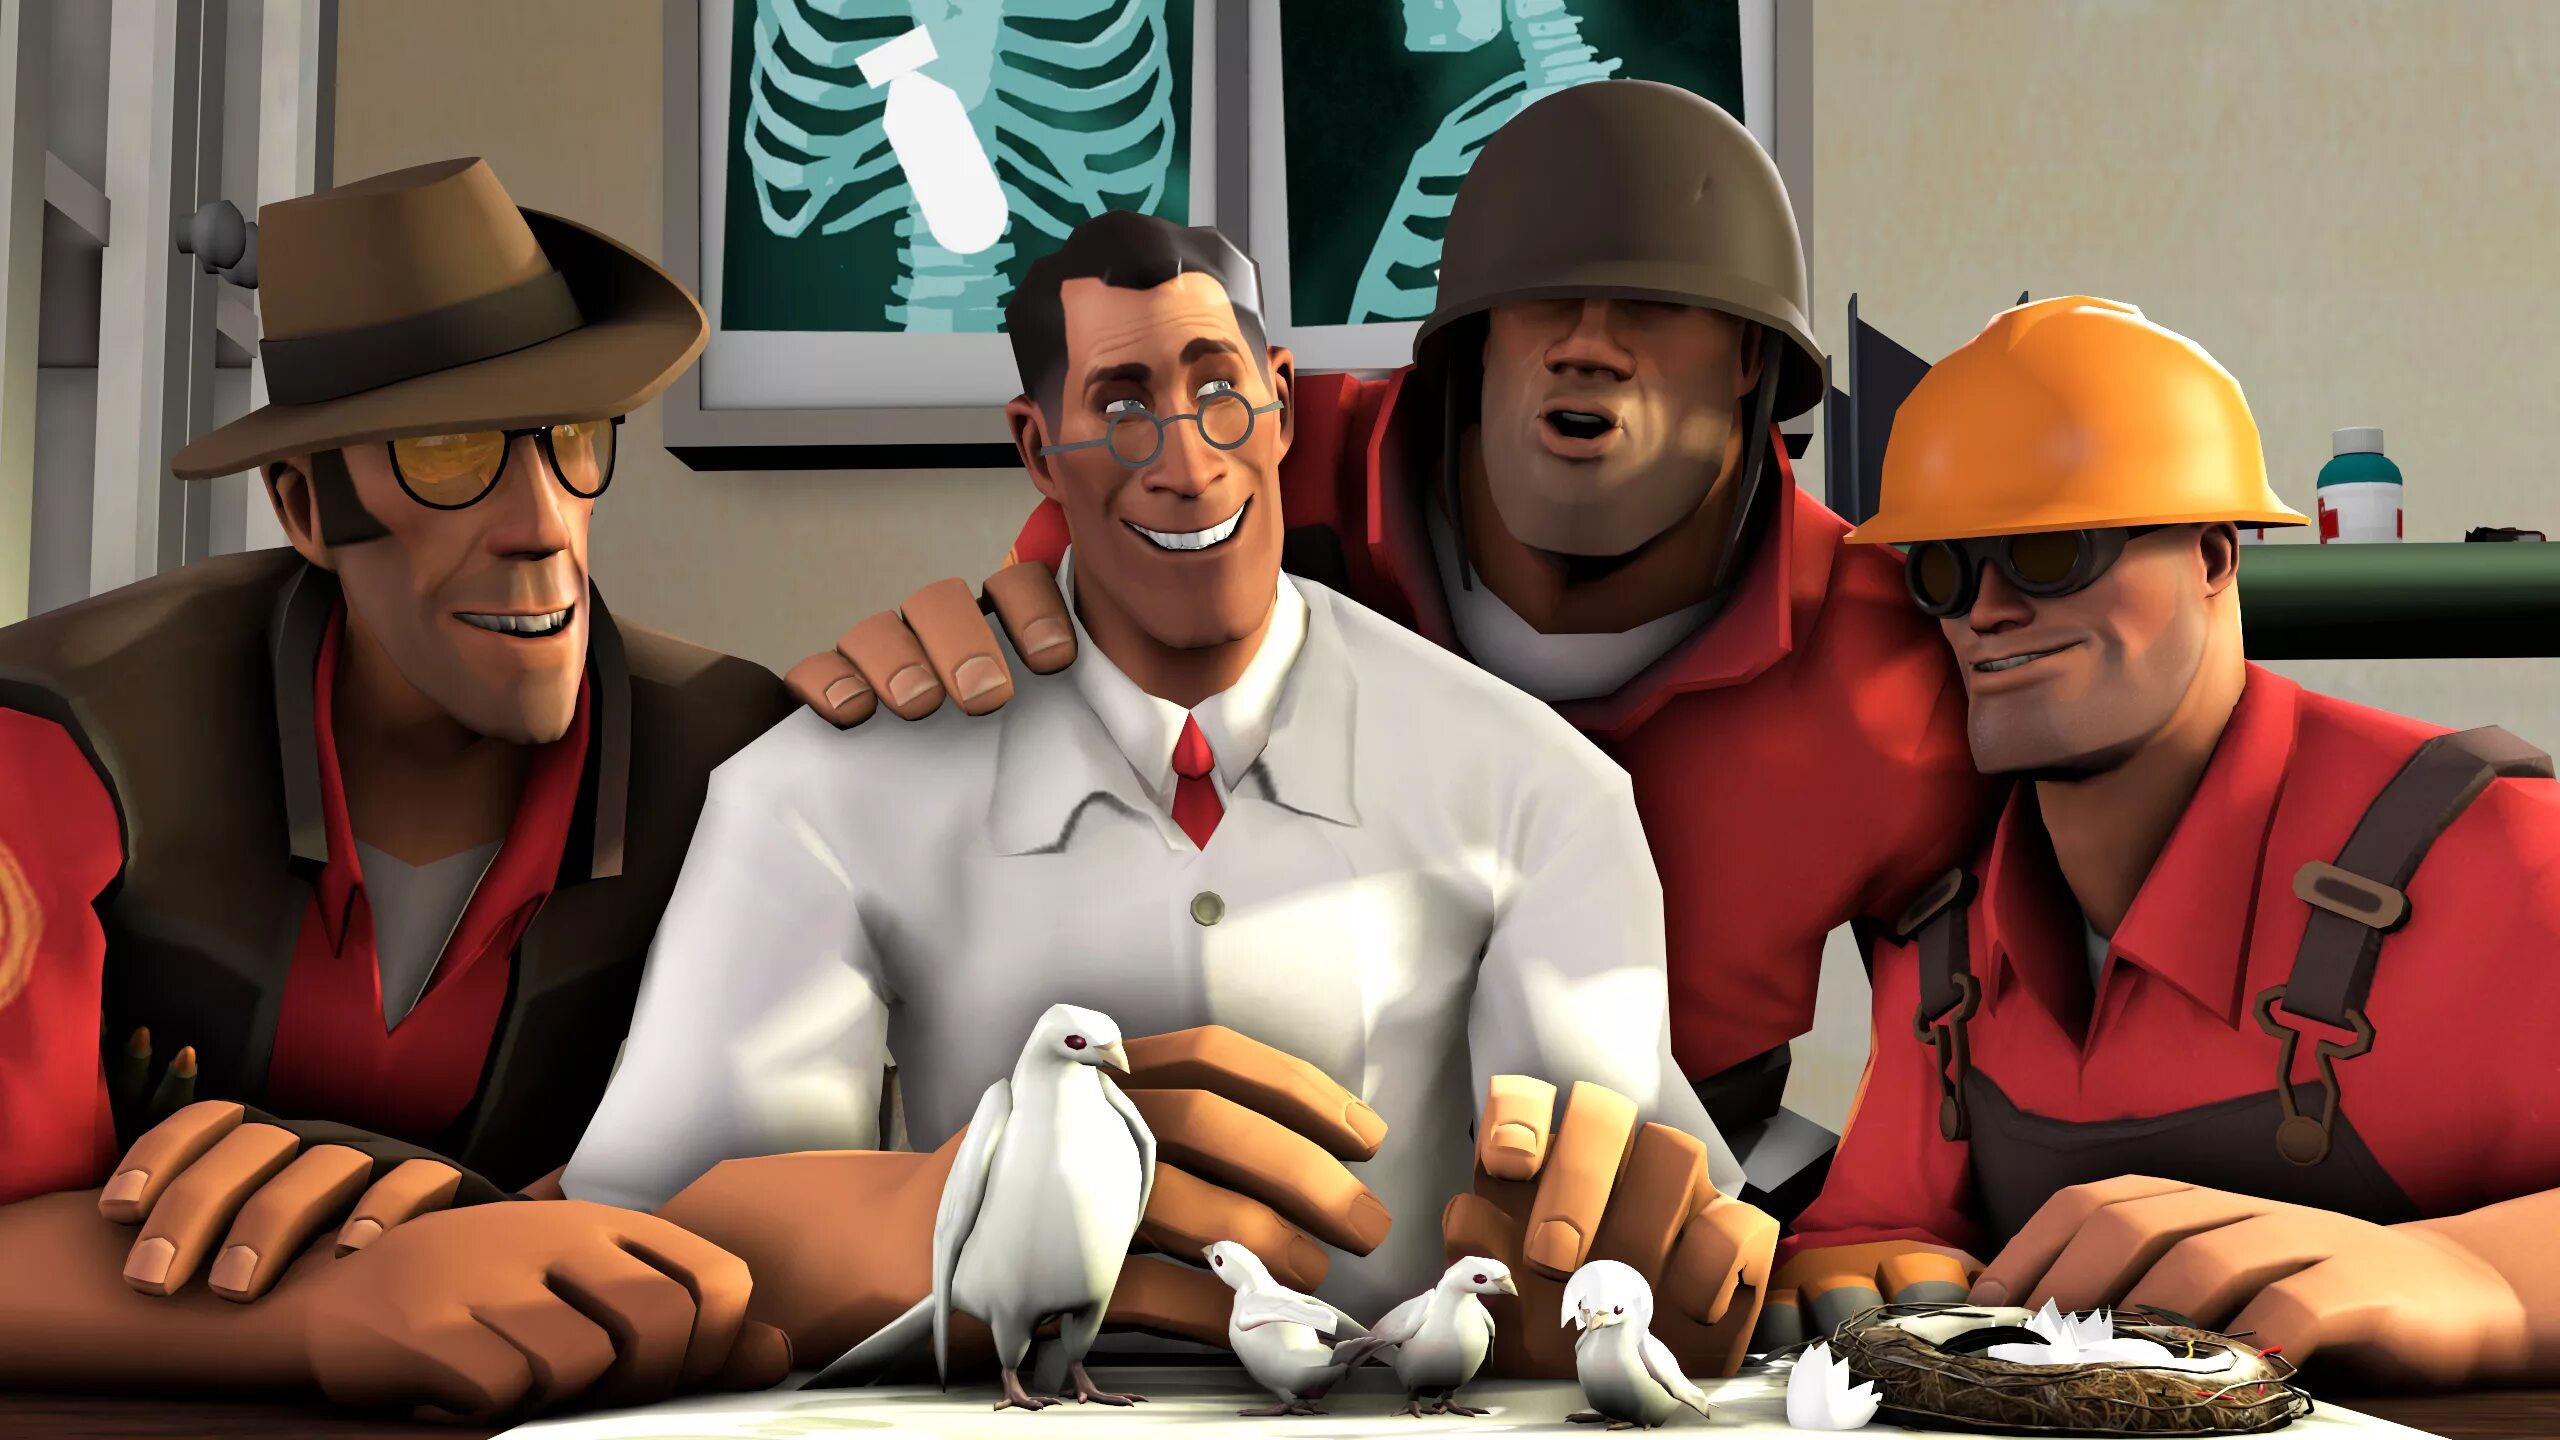 Tf2 selling. Tf2. Team Fortress 2. Медик тф2. Инженер тф2.